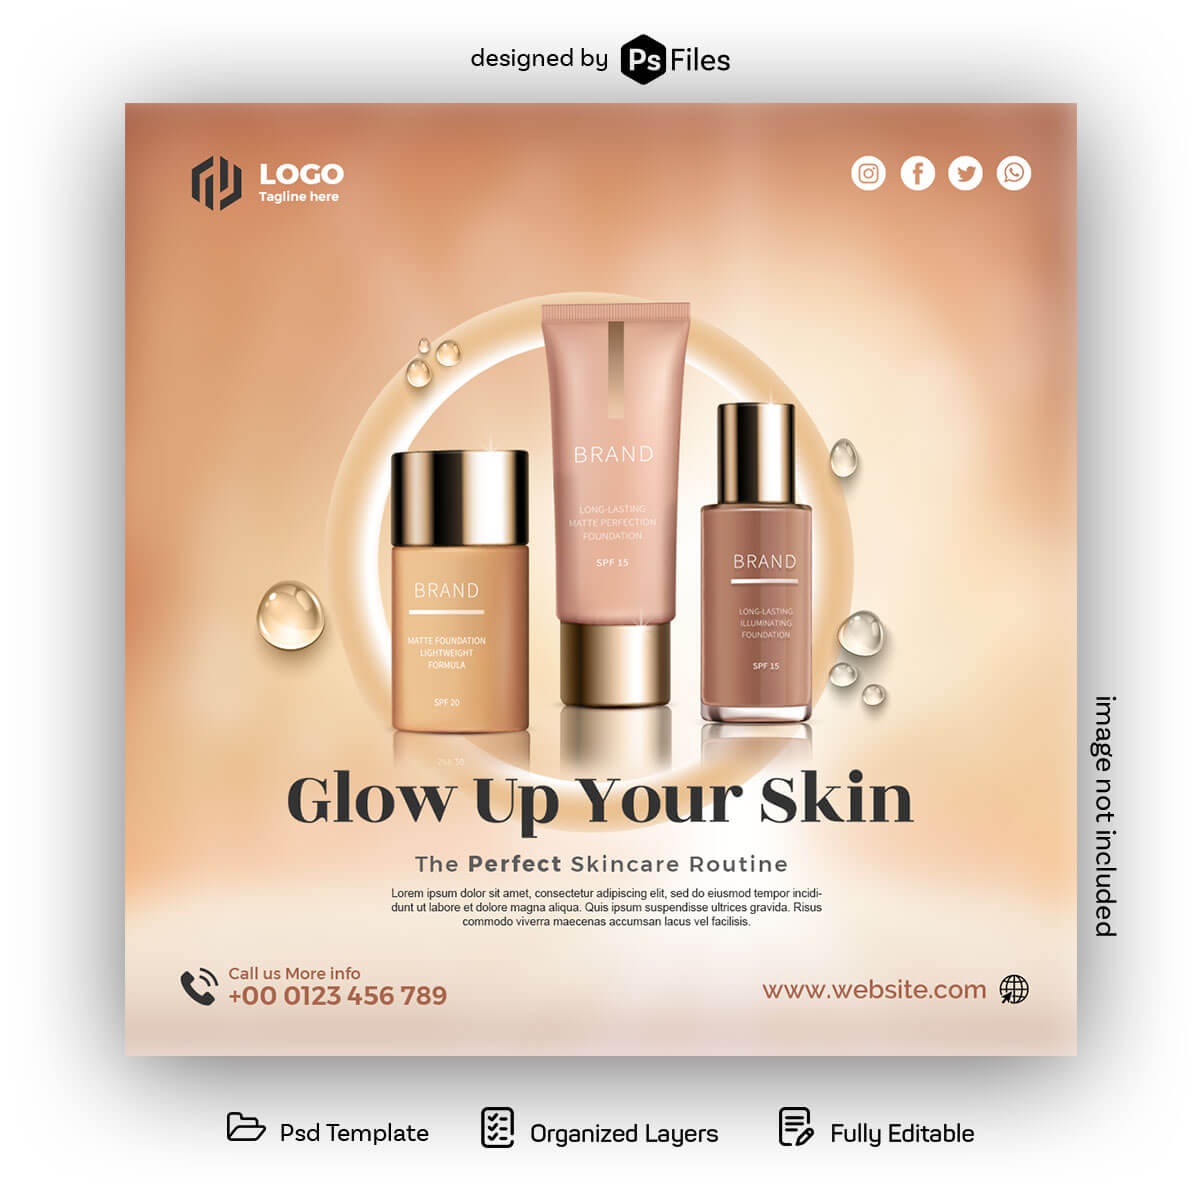 Psfiles Cosmetic Beauty Products Promotion Post Design Free PSD Template Download